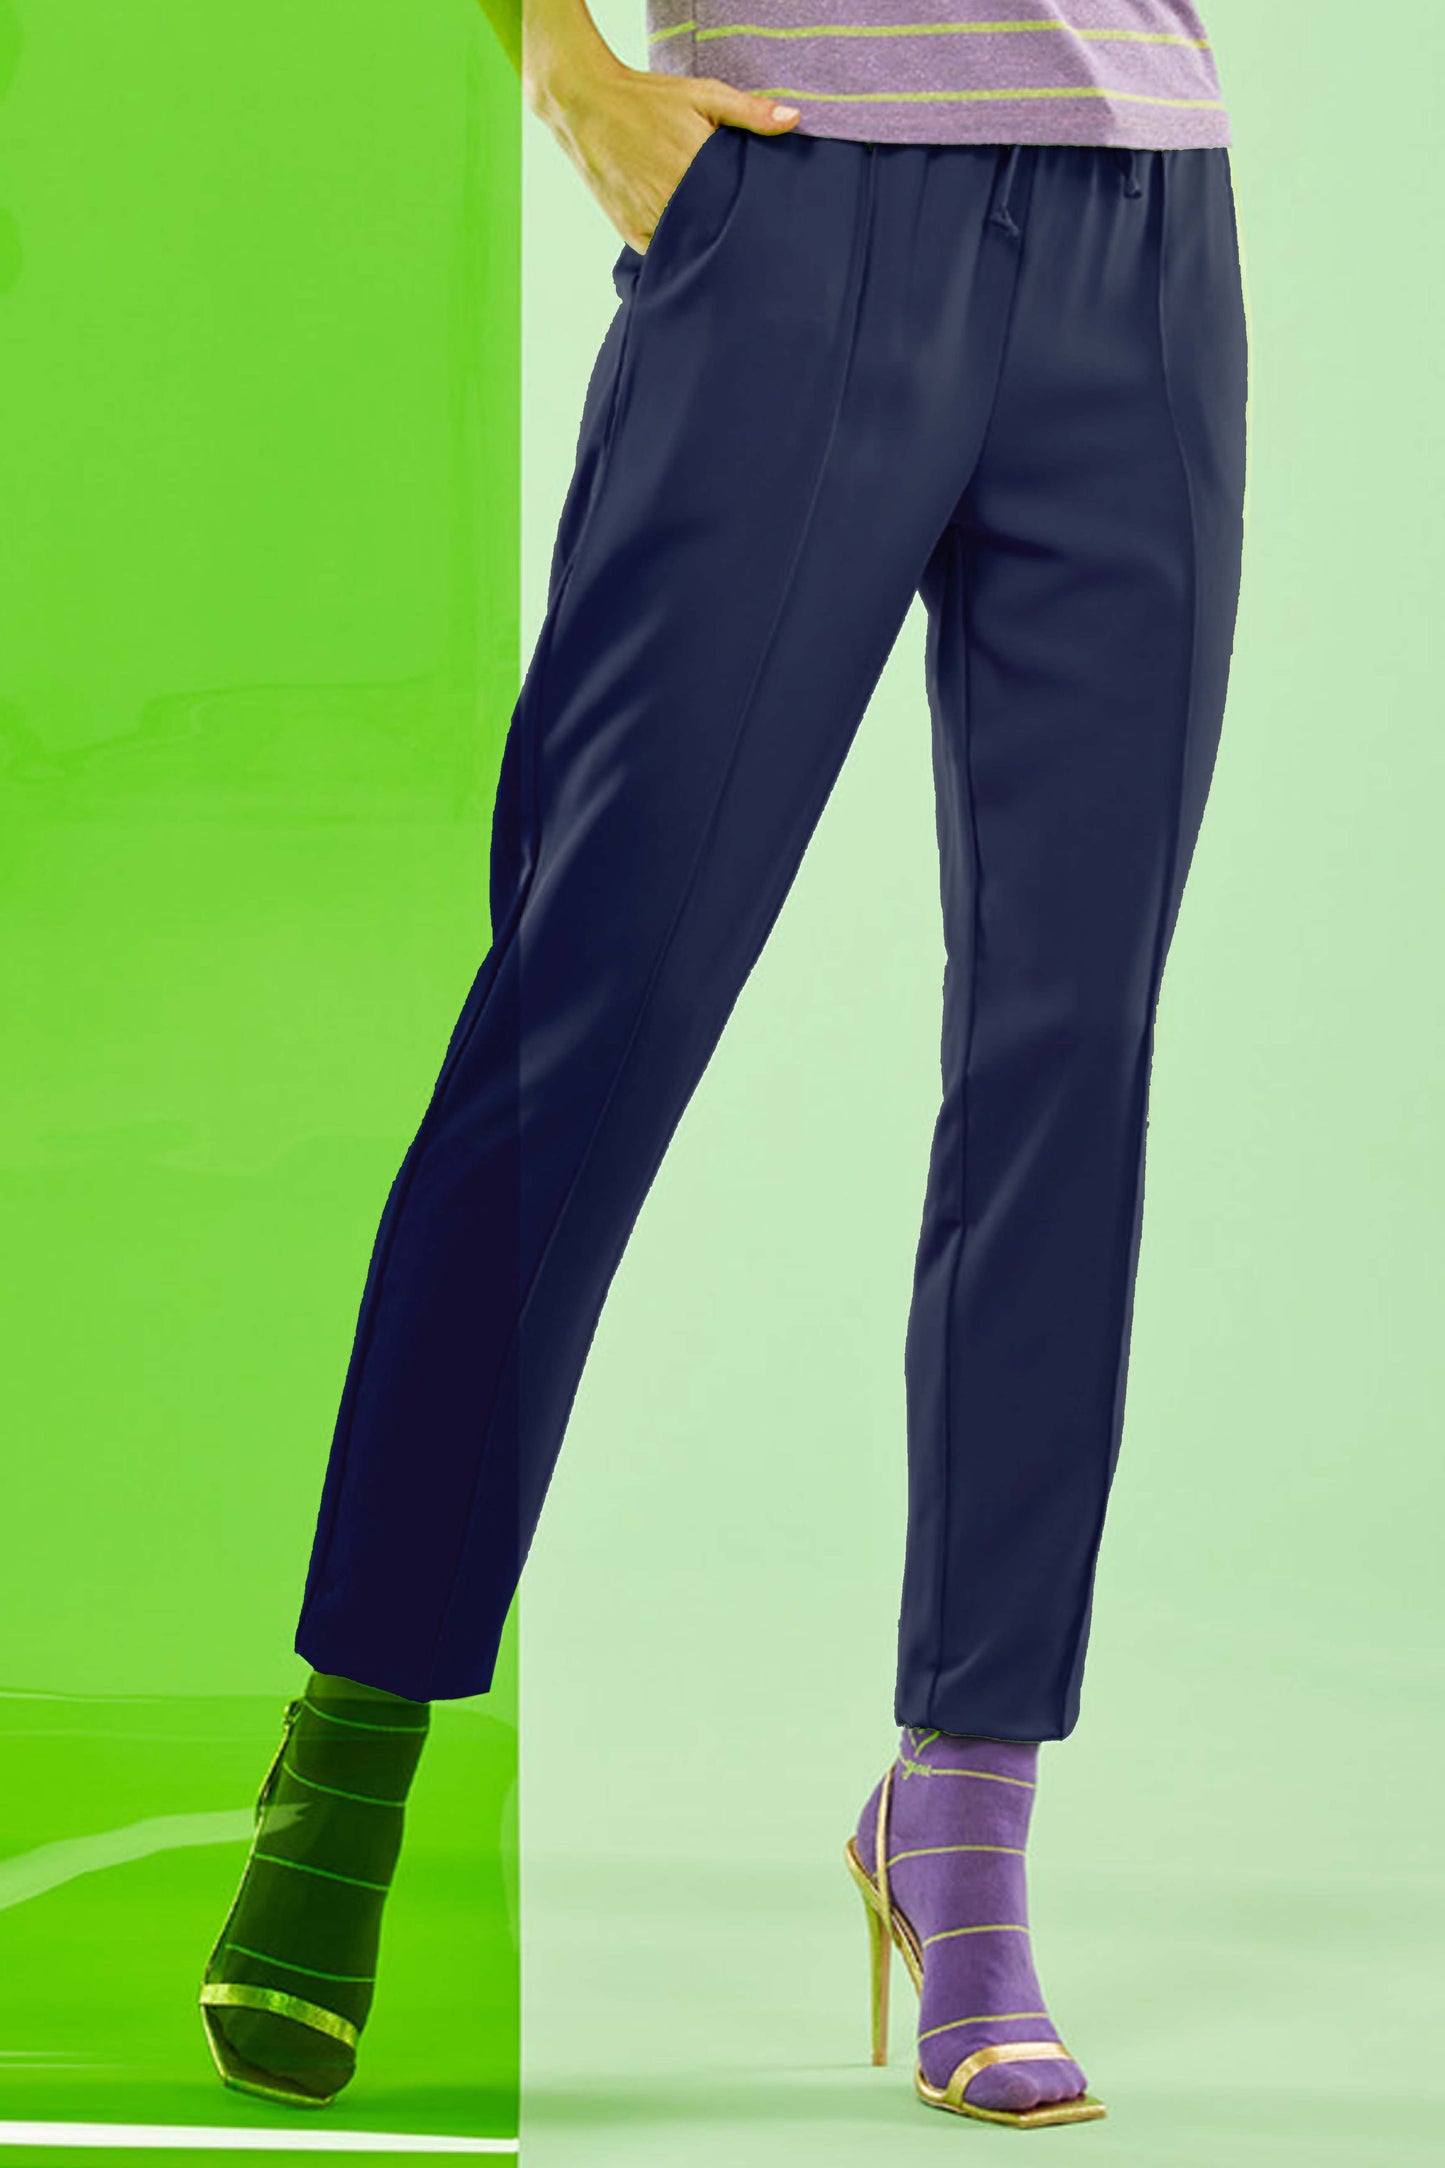 SiSi Swing Trouser - Navy blue colour jogger style trousers with drawstring waist, side pockets and raised centre seam down the front of the leg.